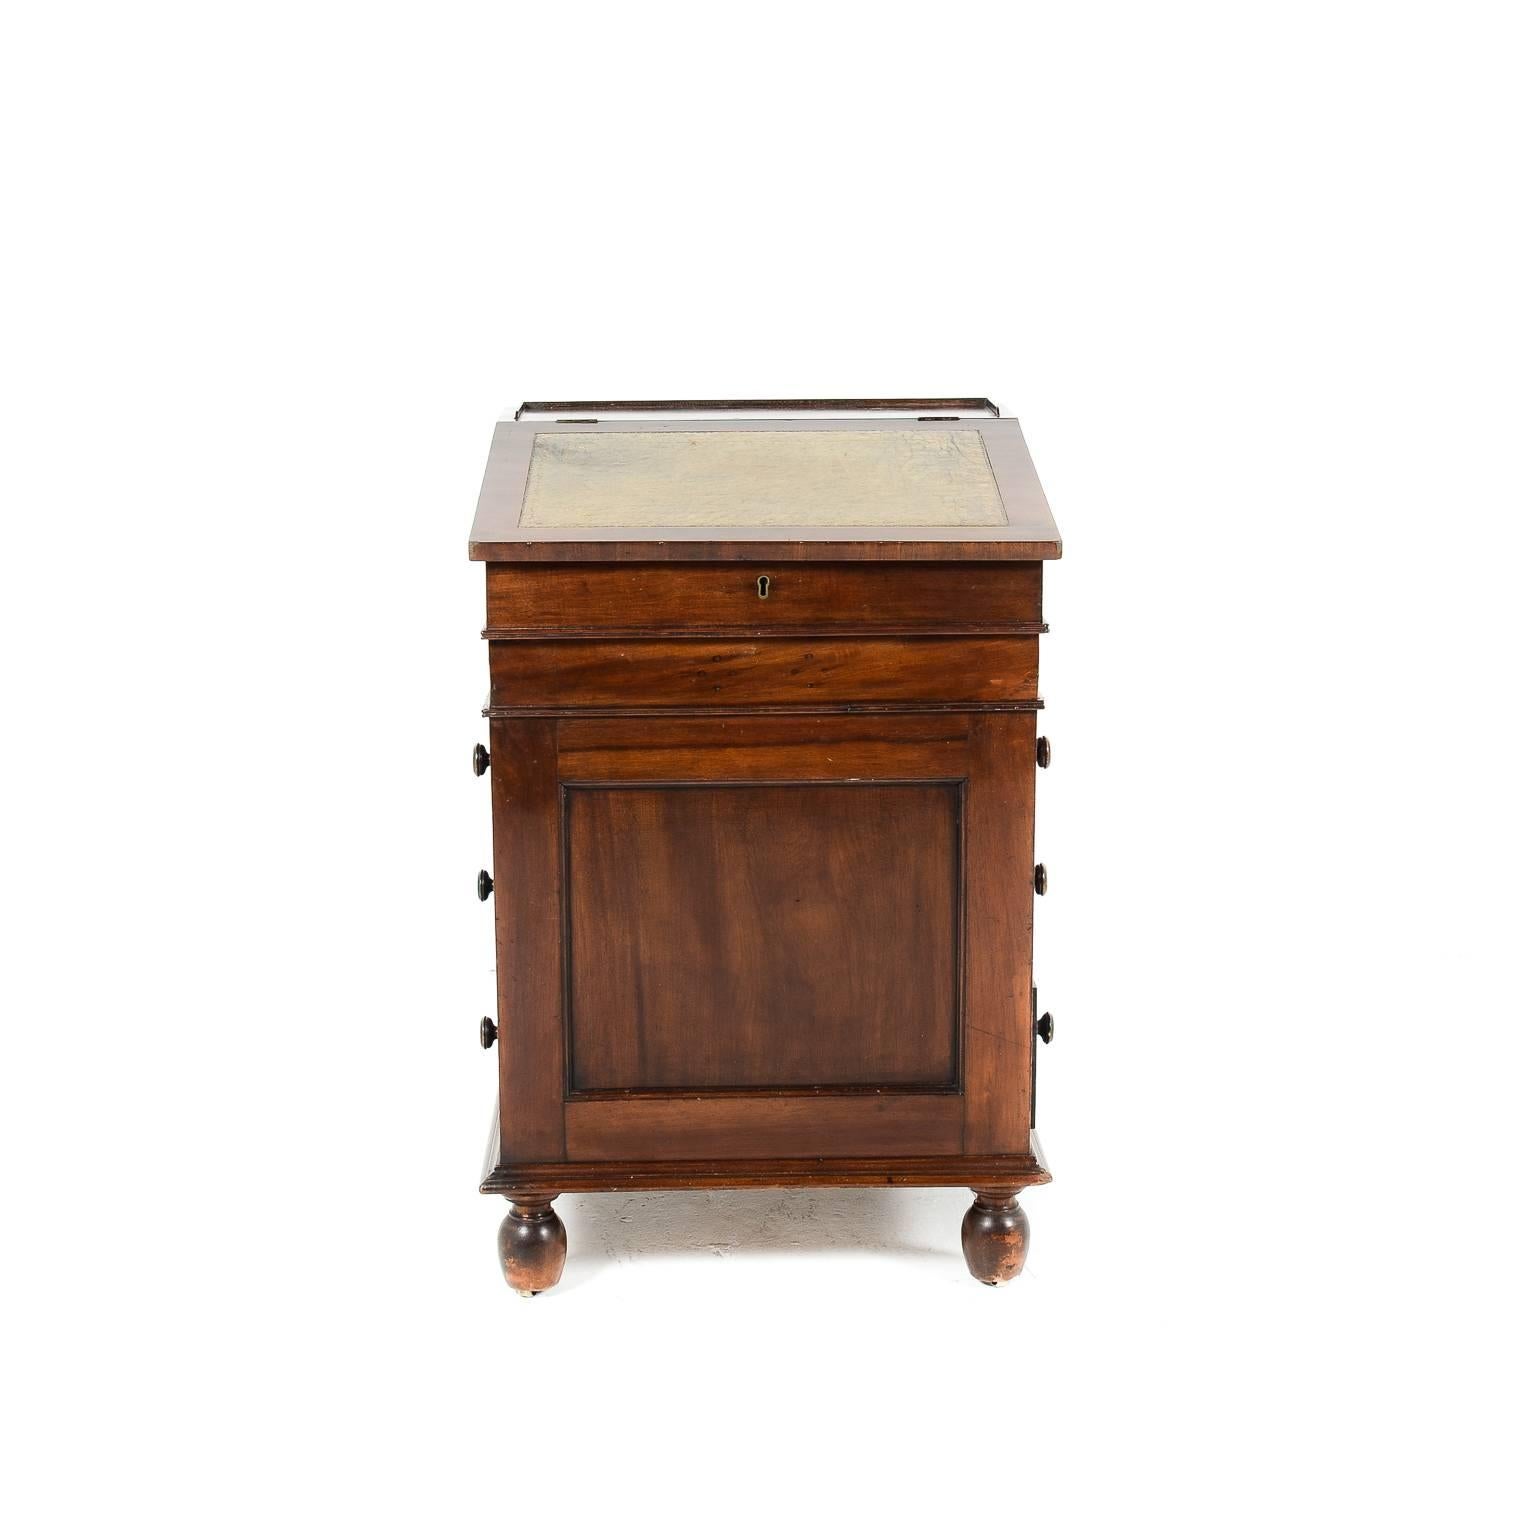 Antique English mahogany Davenport desk with sliding top. Provenance from the Vancouver Dueck family.

Fitted with four large drawers, a small pen and ink drawer, two pull-out slides, and two small fitted interior drawers.

On bun feet with inset